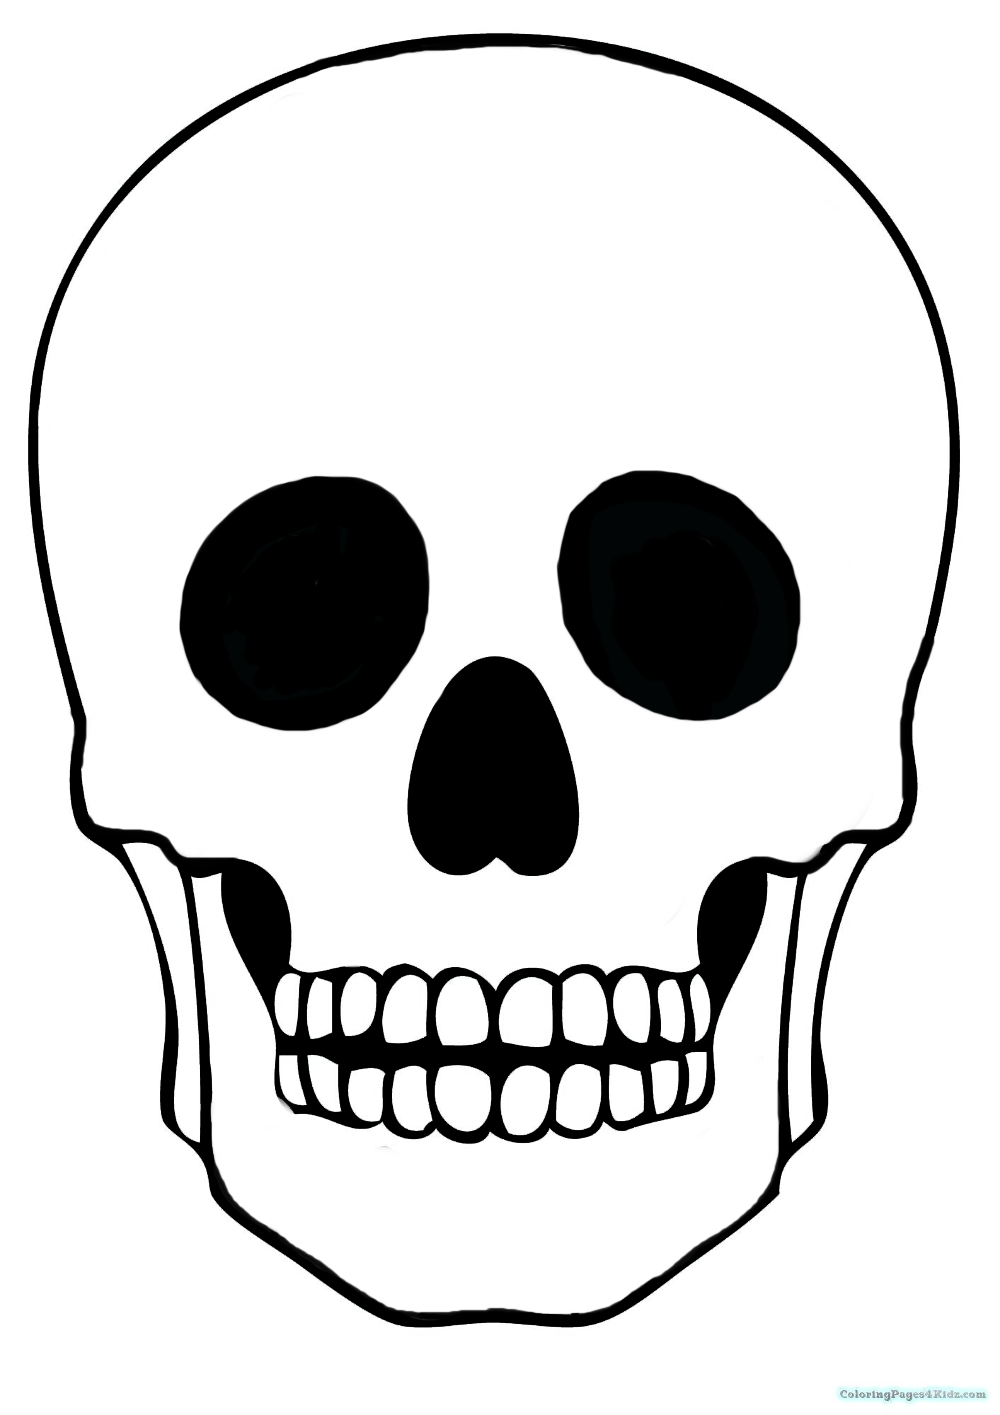 skull_template.png